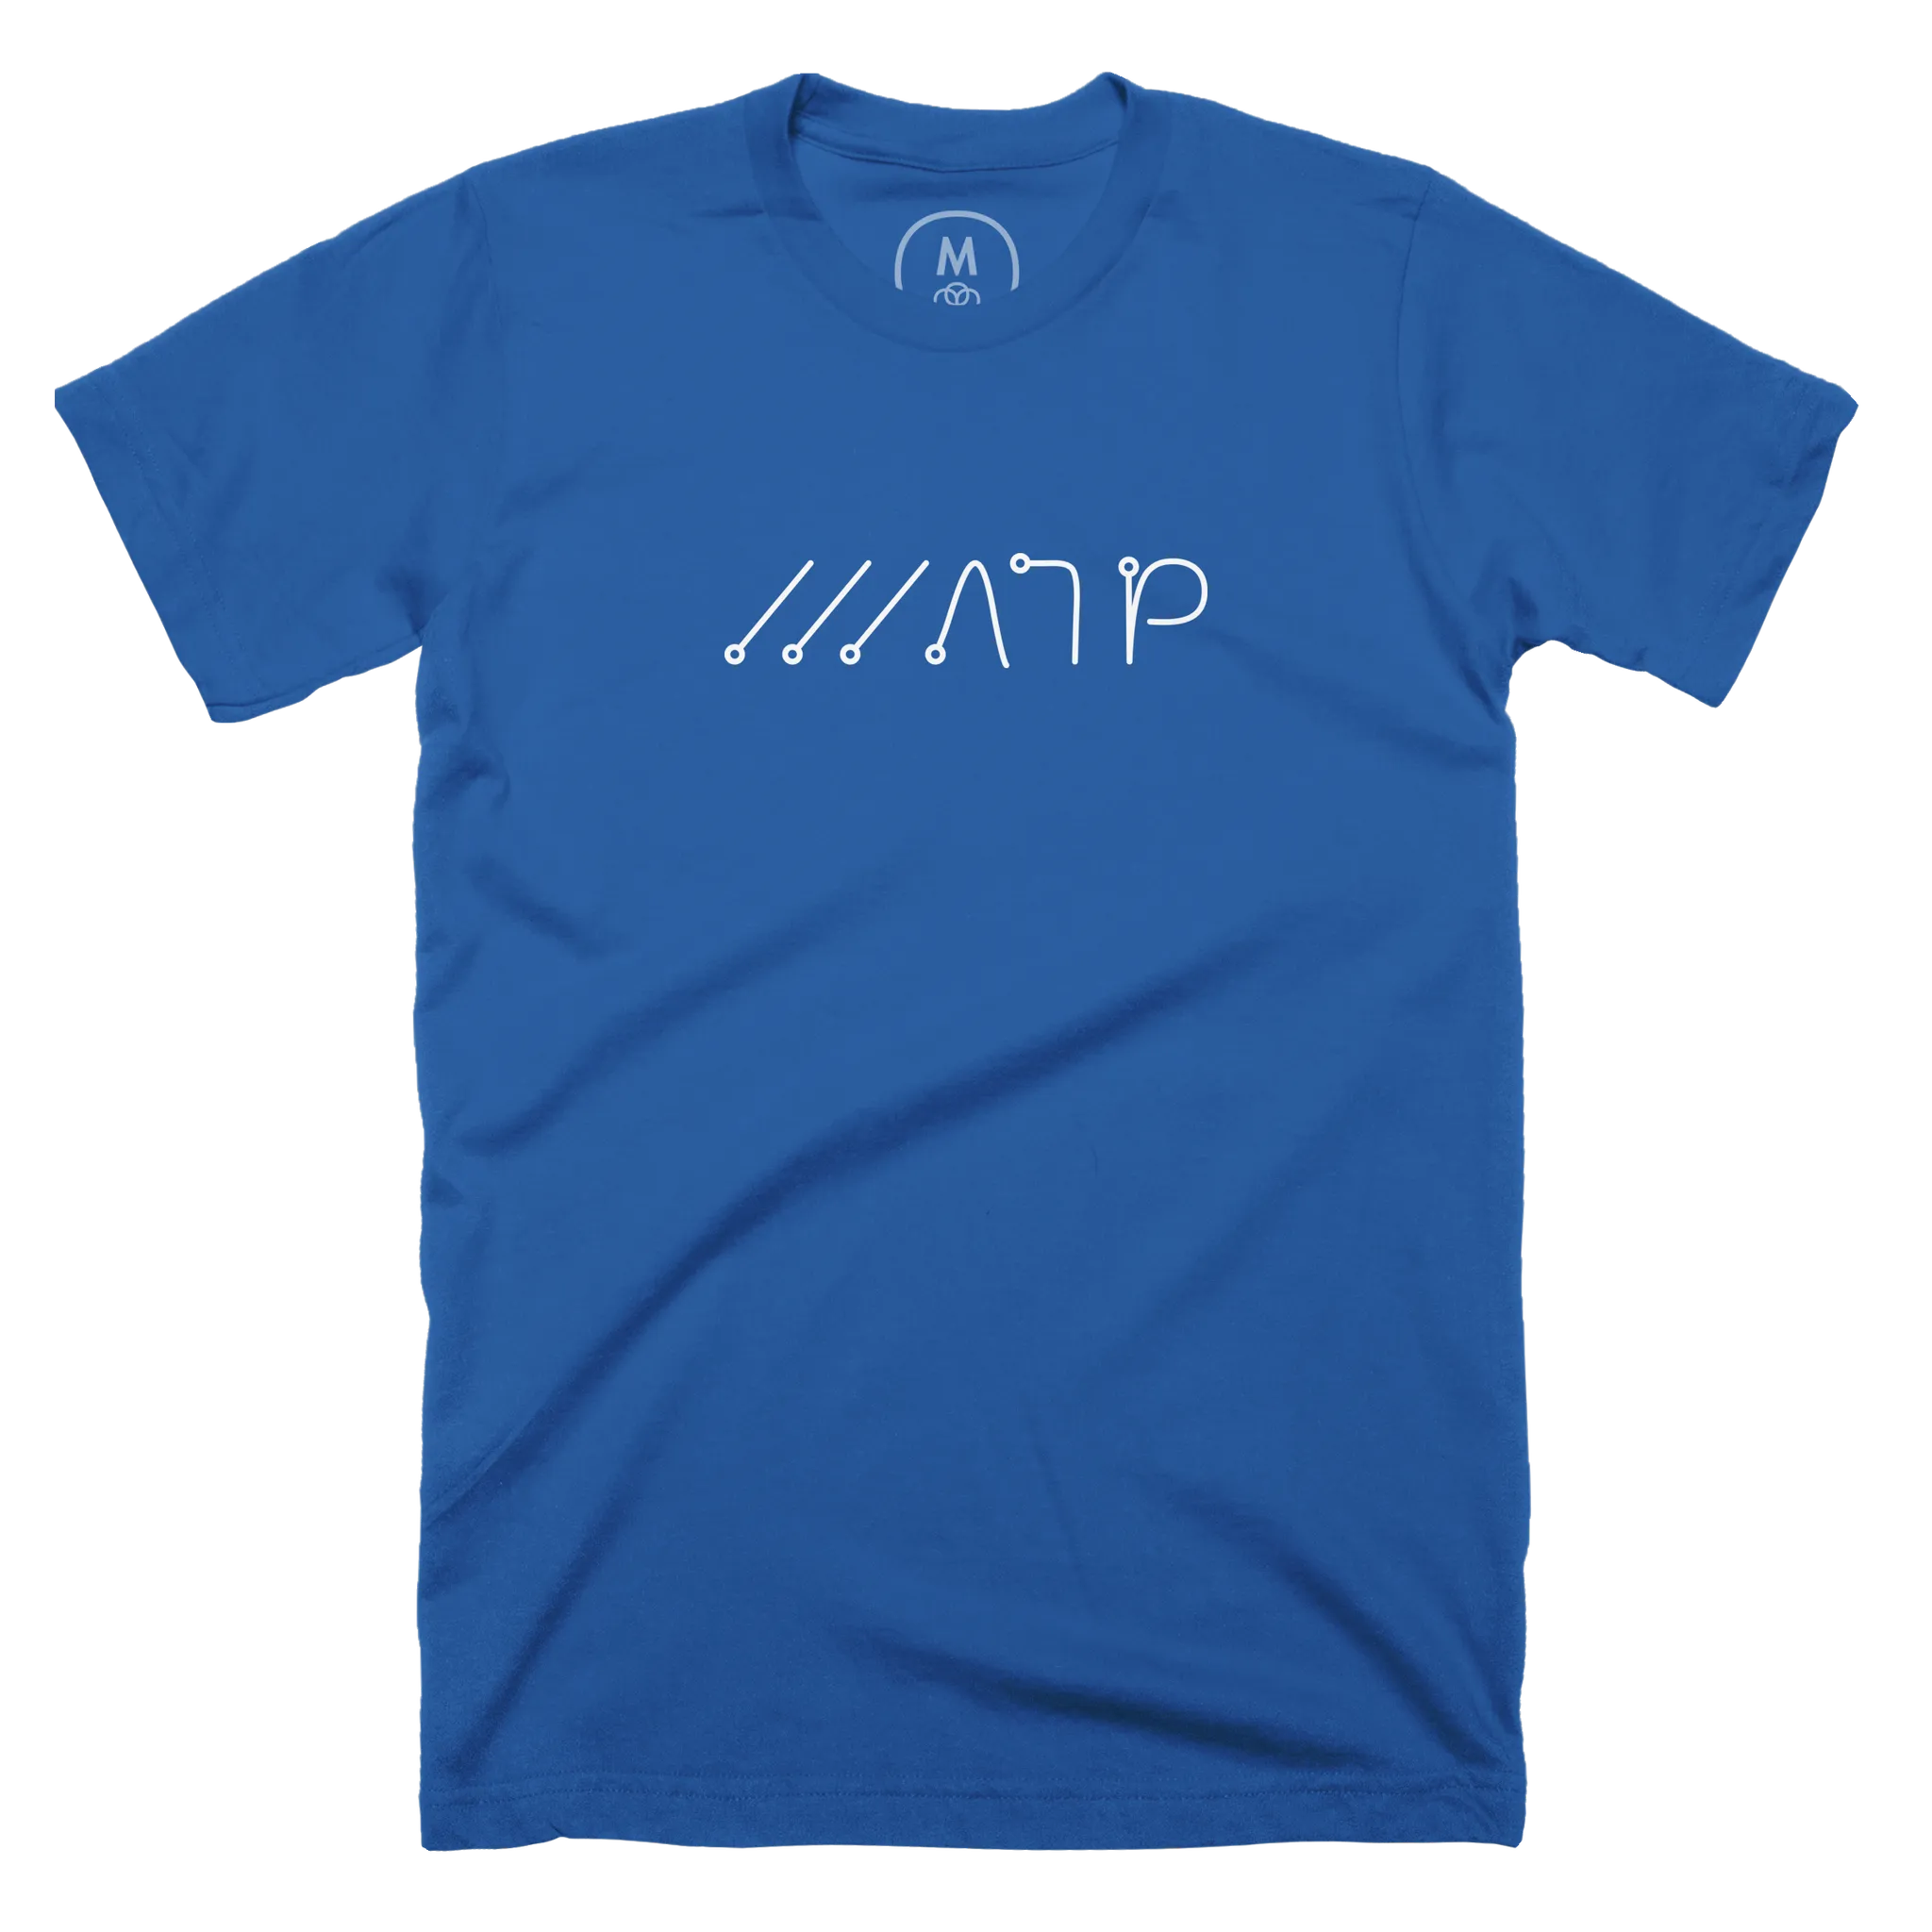 A blue t-shirt with the ///ATP logo written using Palm’s Graffiti writing system.